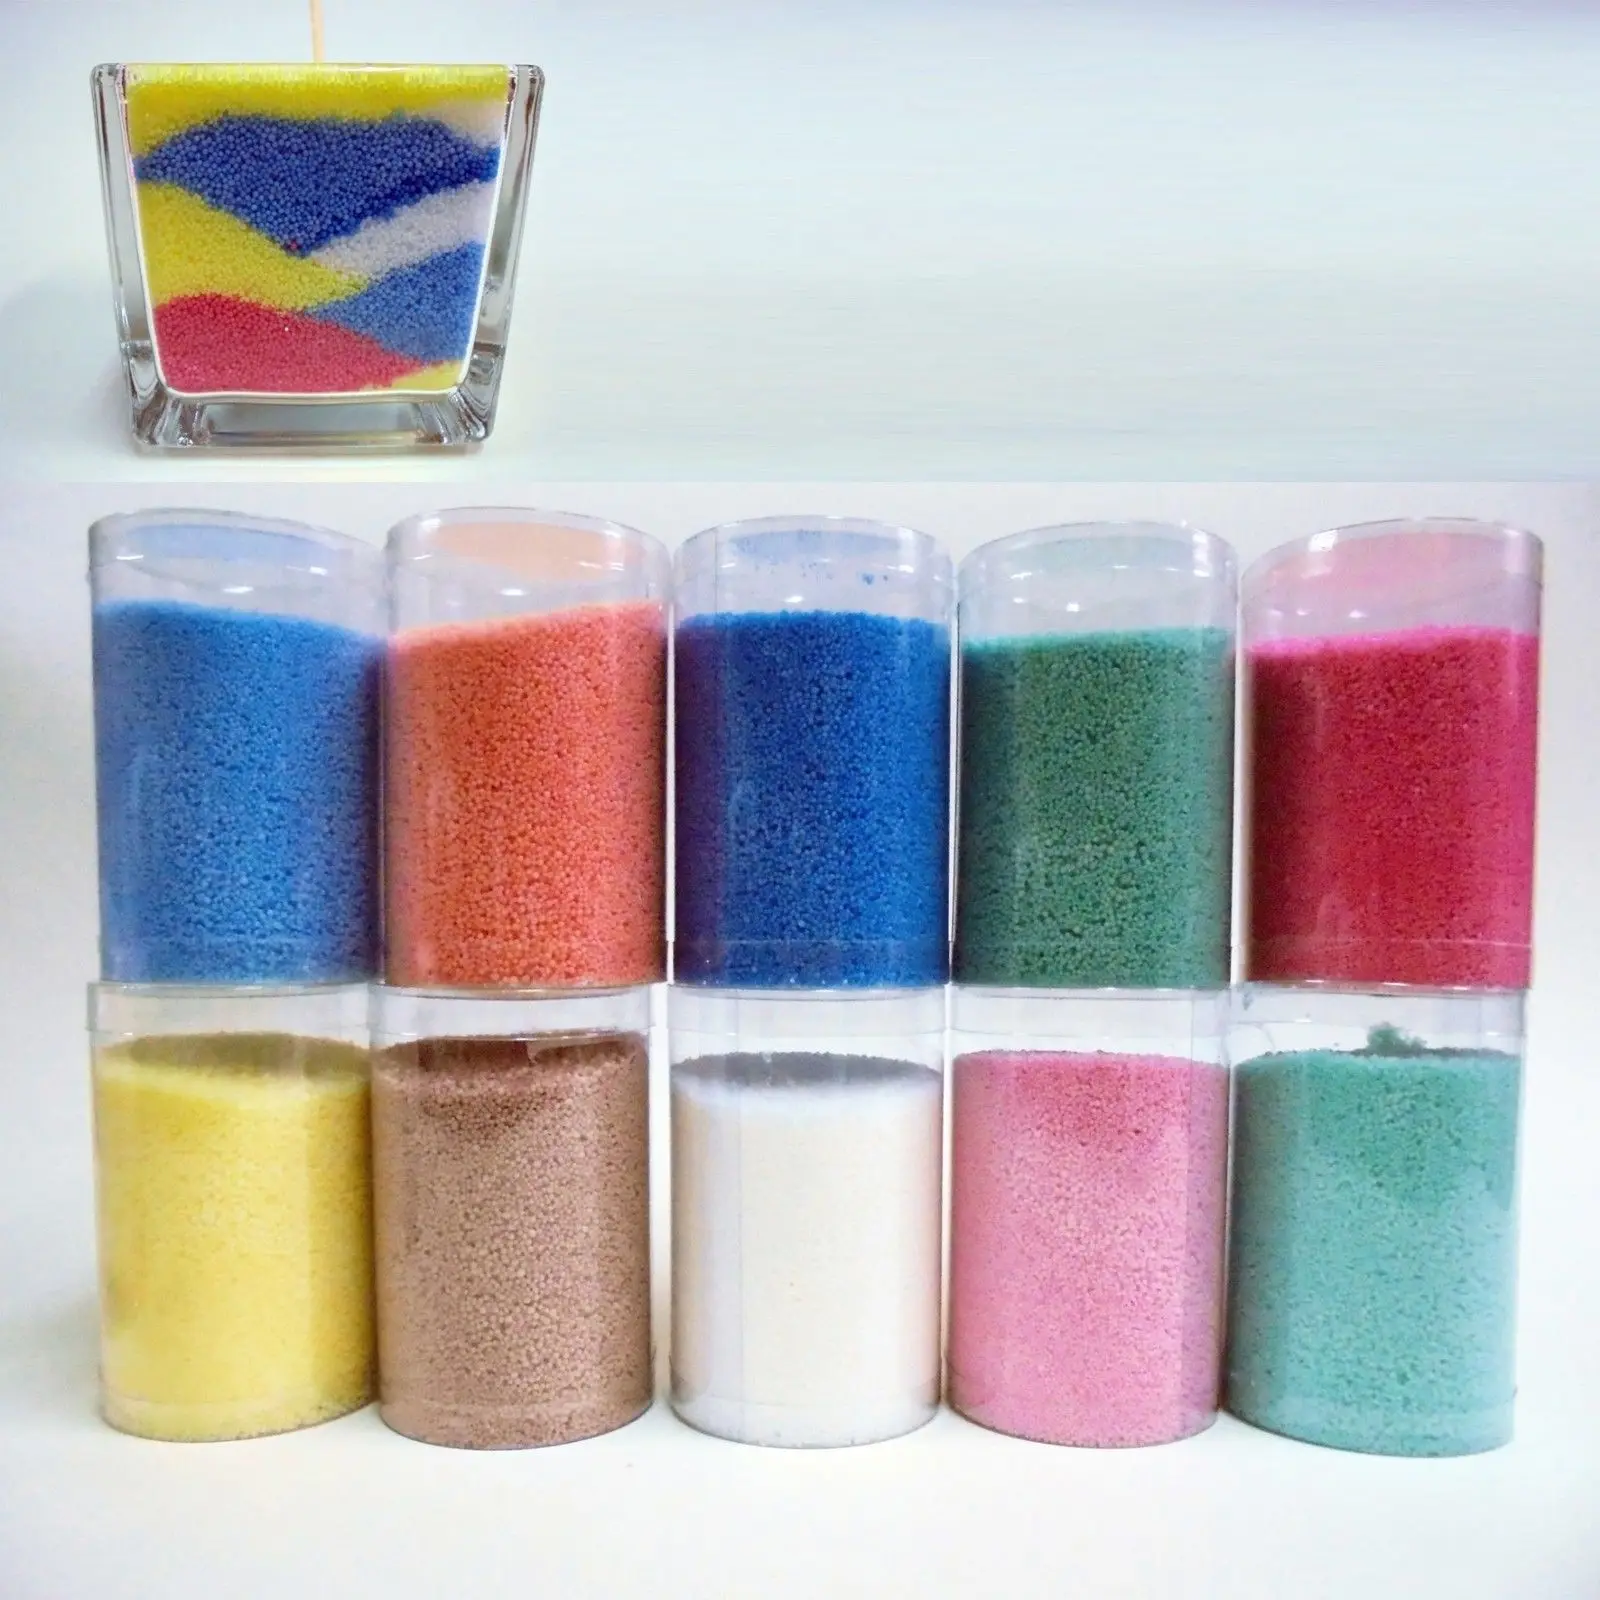 Young children making fun colorful layered granulated wax candles